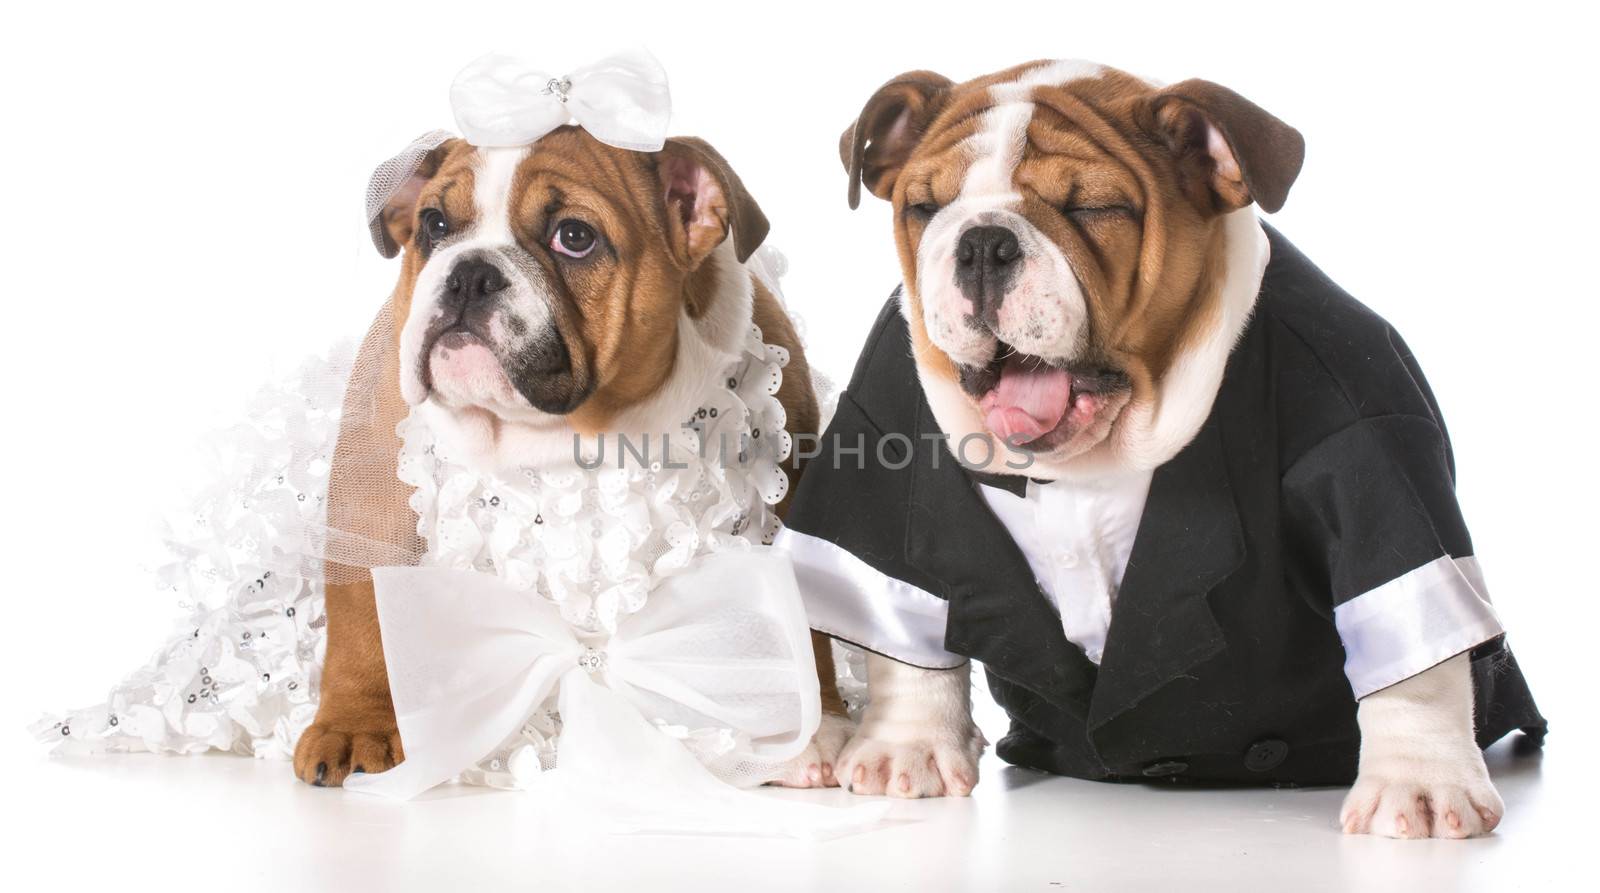 dog bride and groom by willeecole123